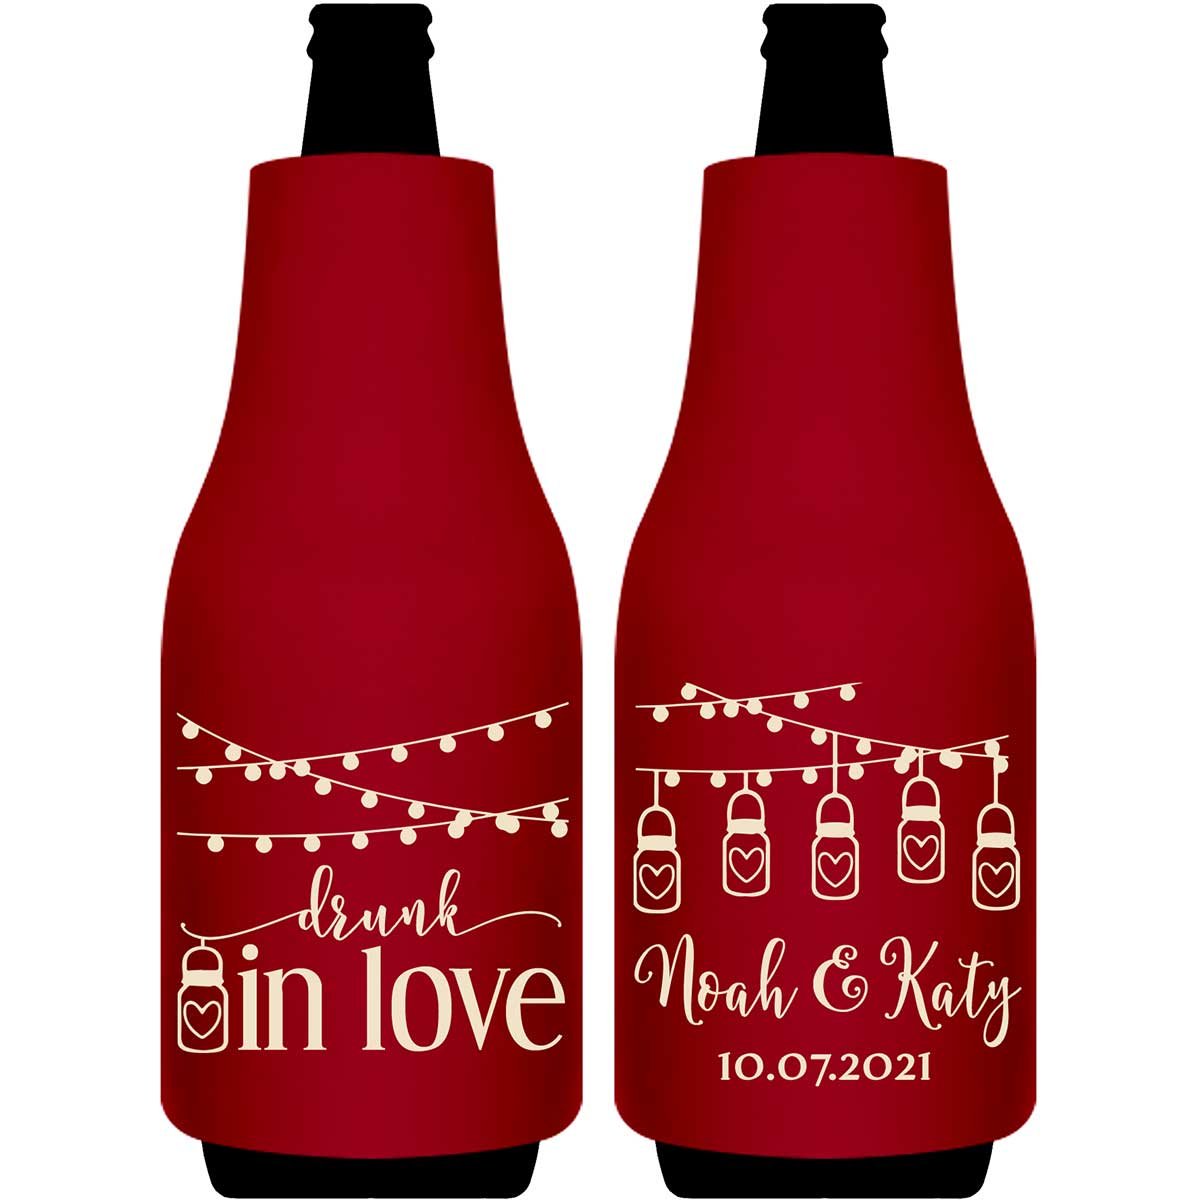 Drunk In Love 2A Mason Jars Foldable Bottle Sleeve Koozies Wedding Gifts for Guests